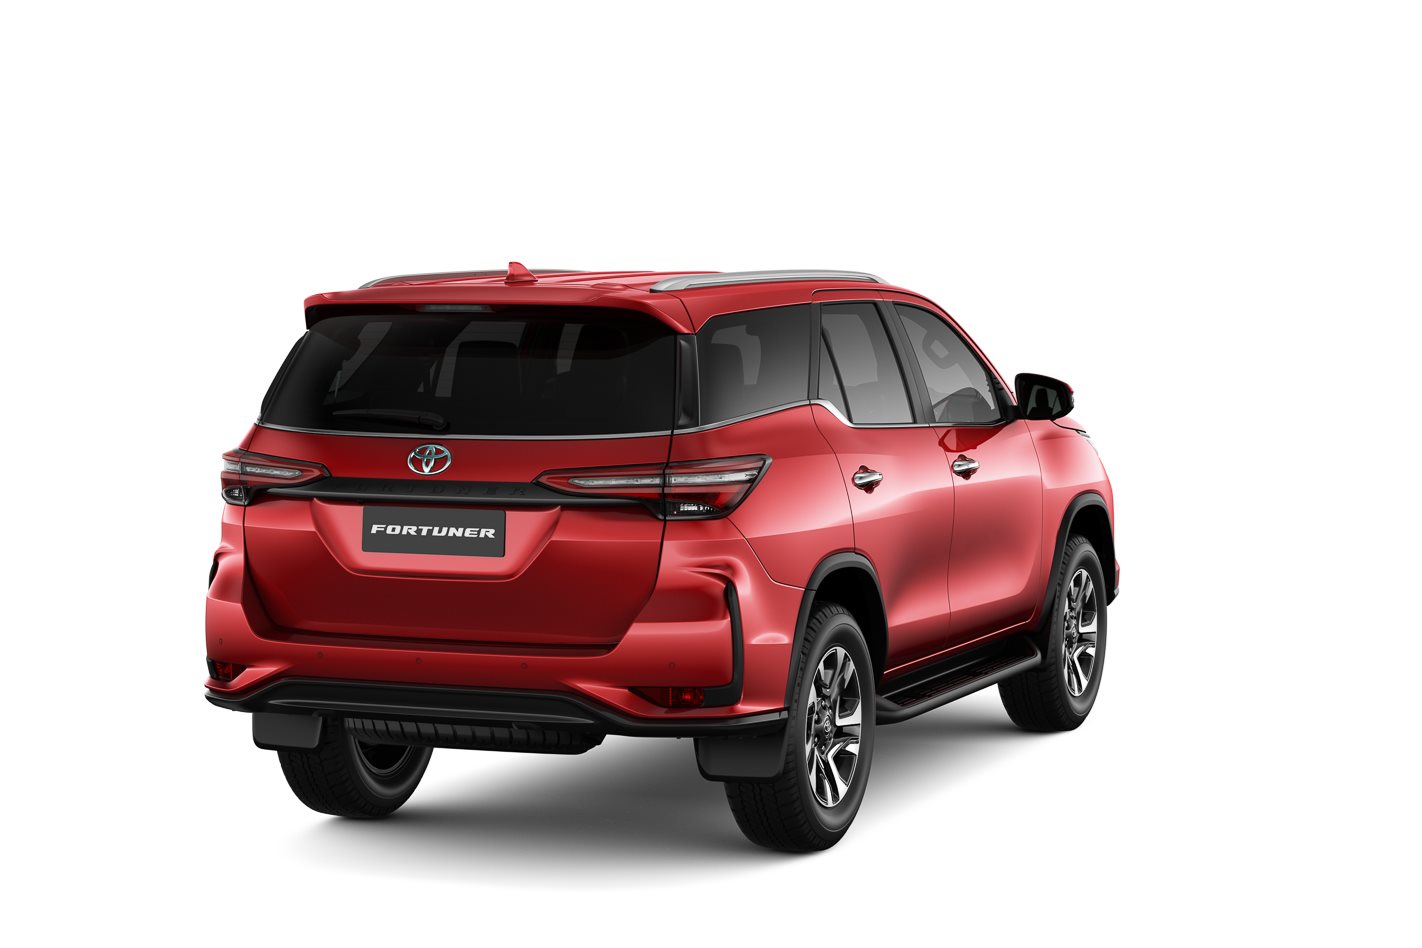 Toyota Fortuner 2021 pricing and features